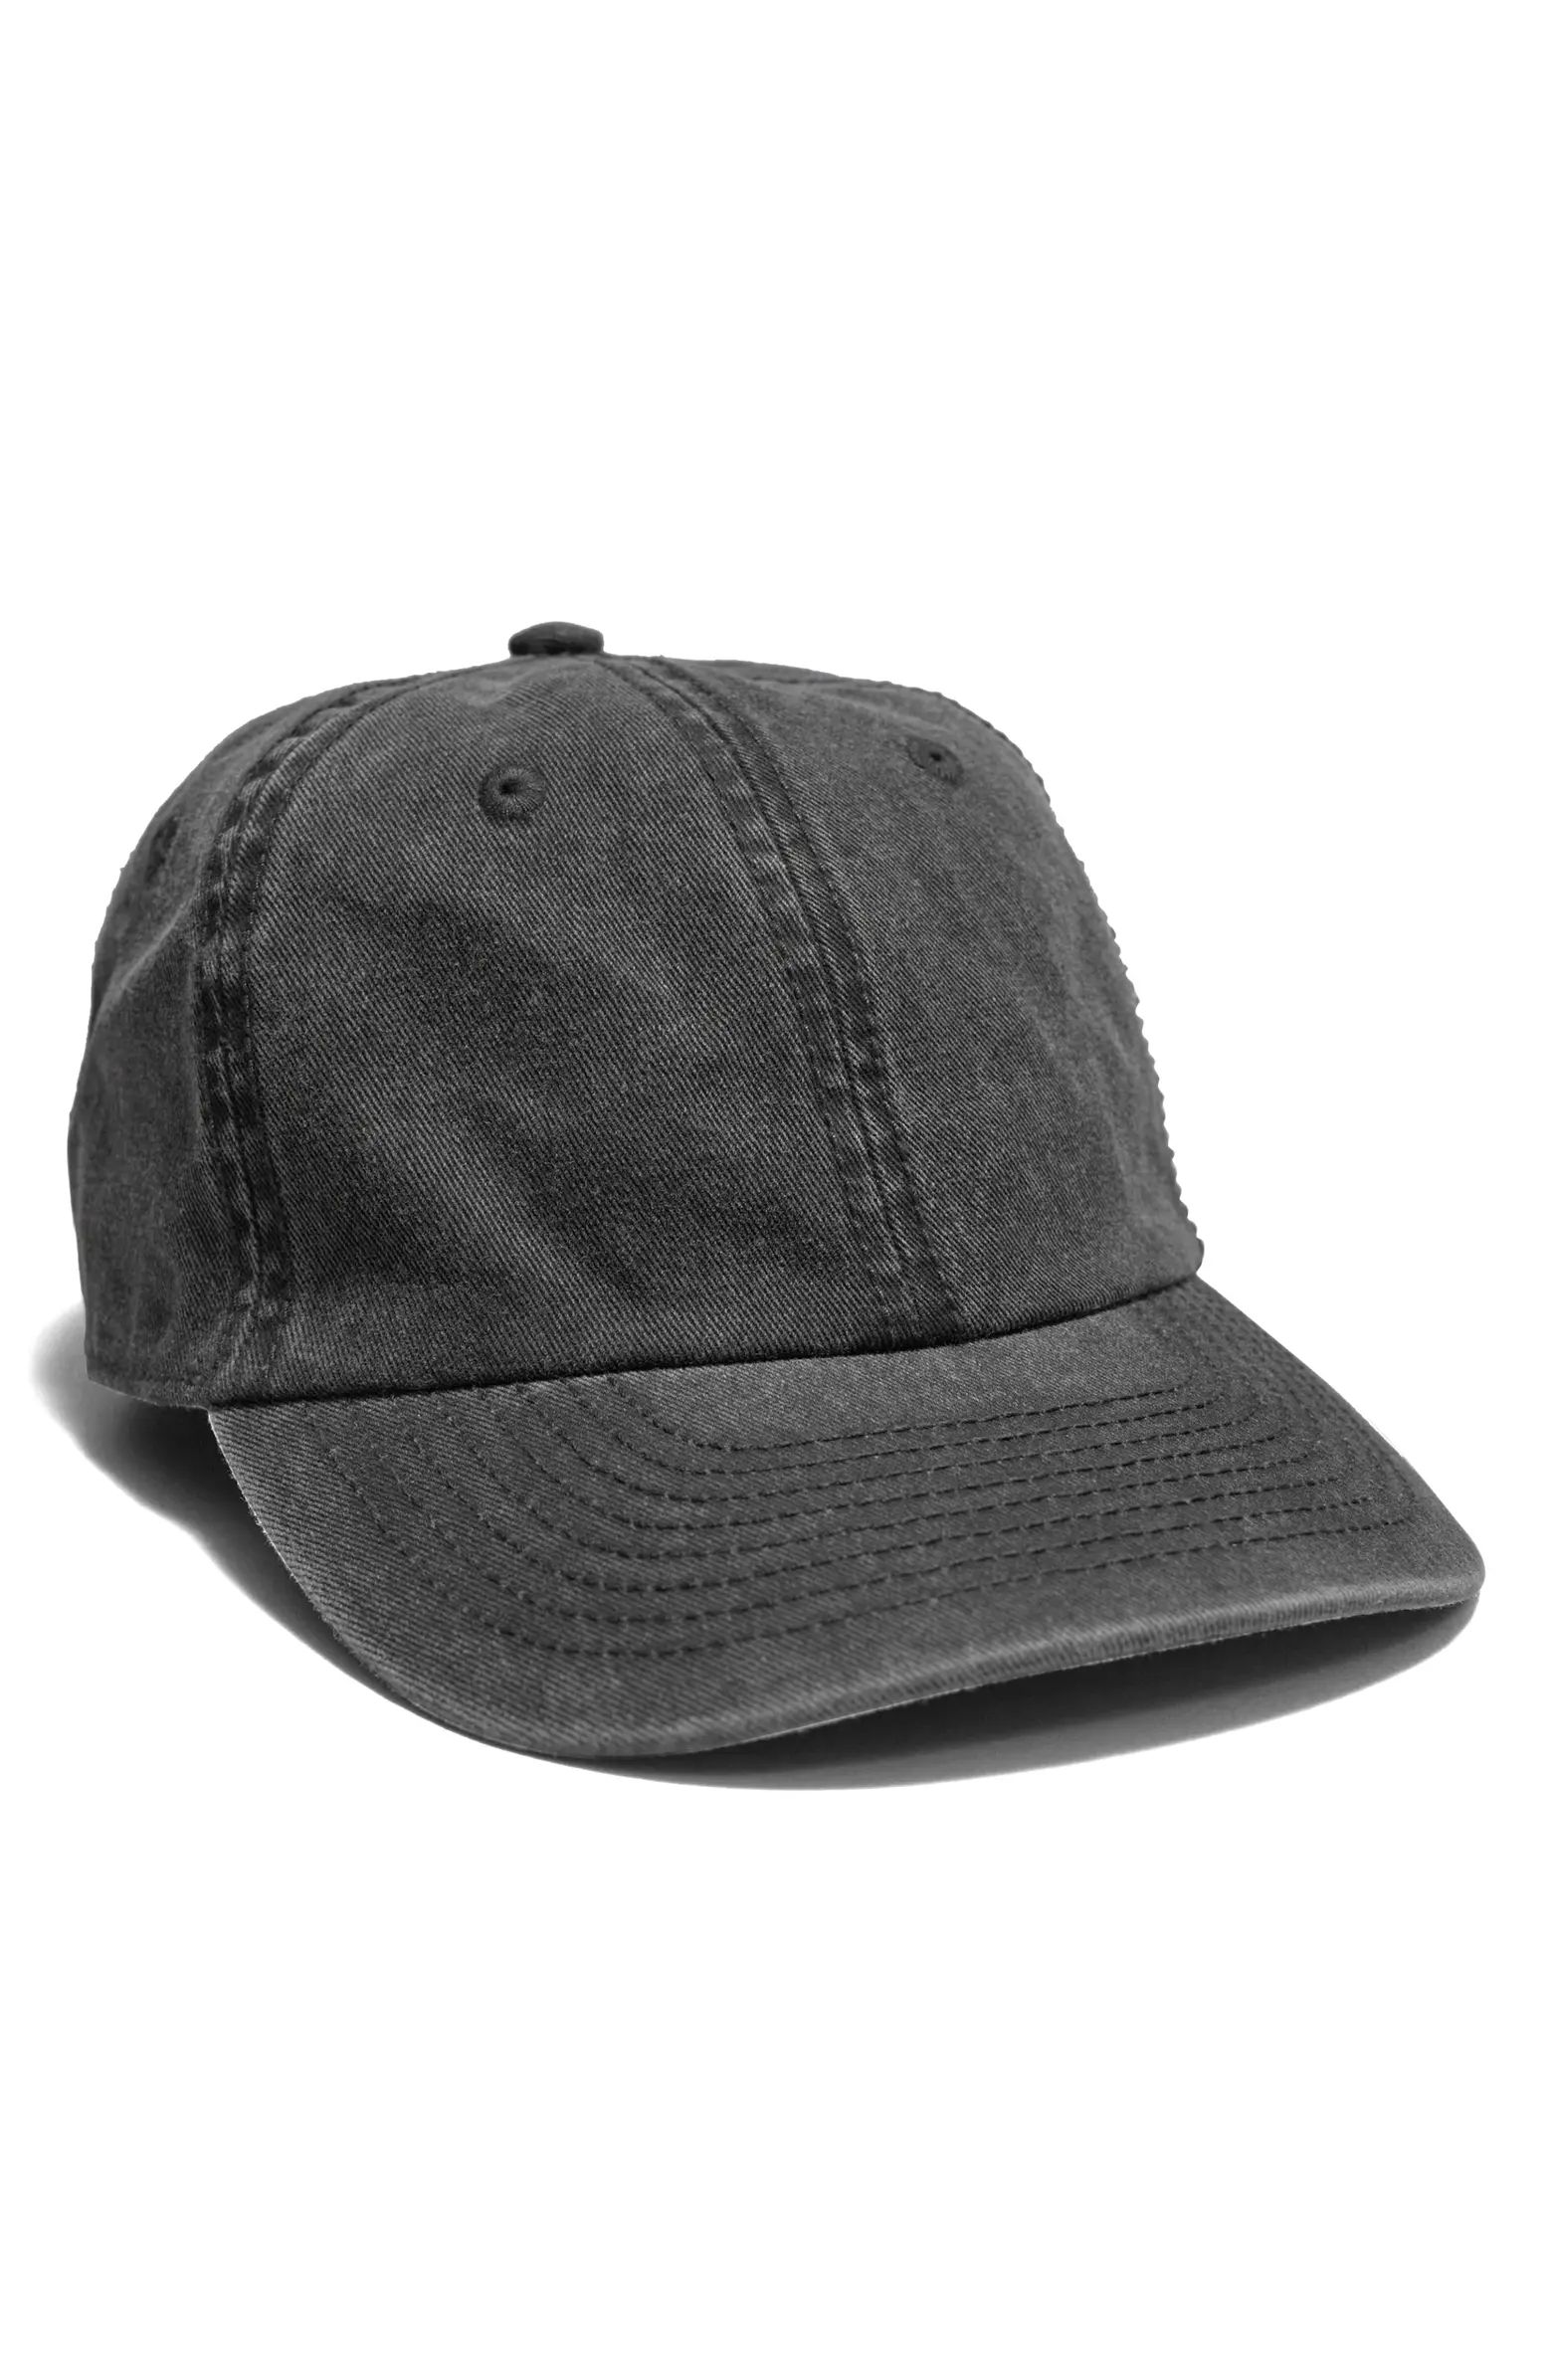 & Other Stories Cotton Twill Baseball Cap | Nordstrom | Nordstrom